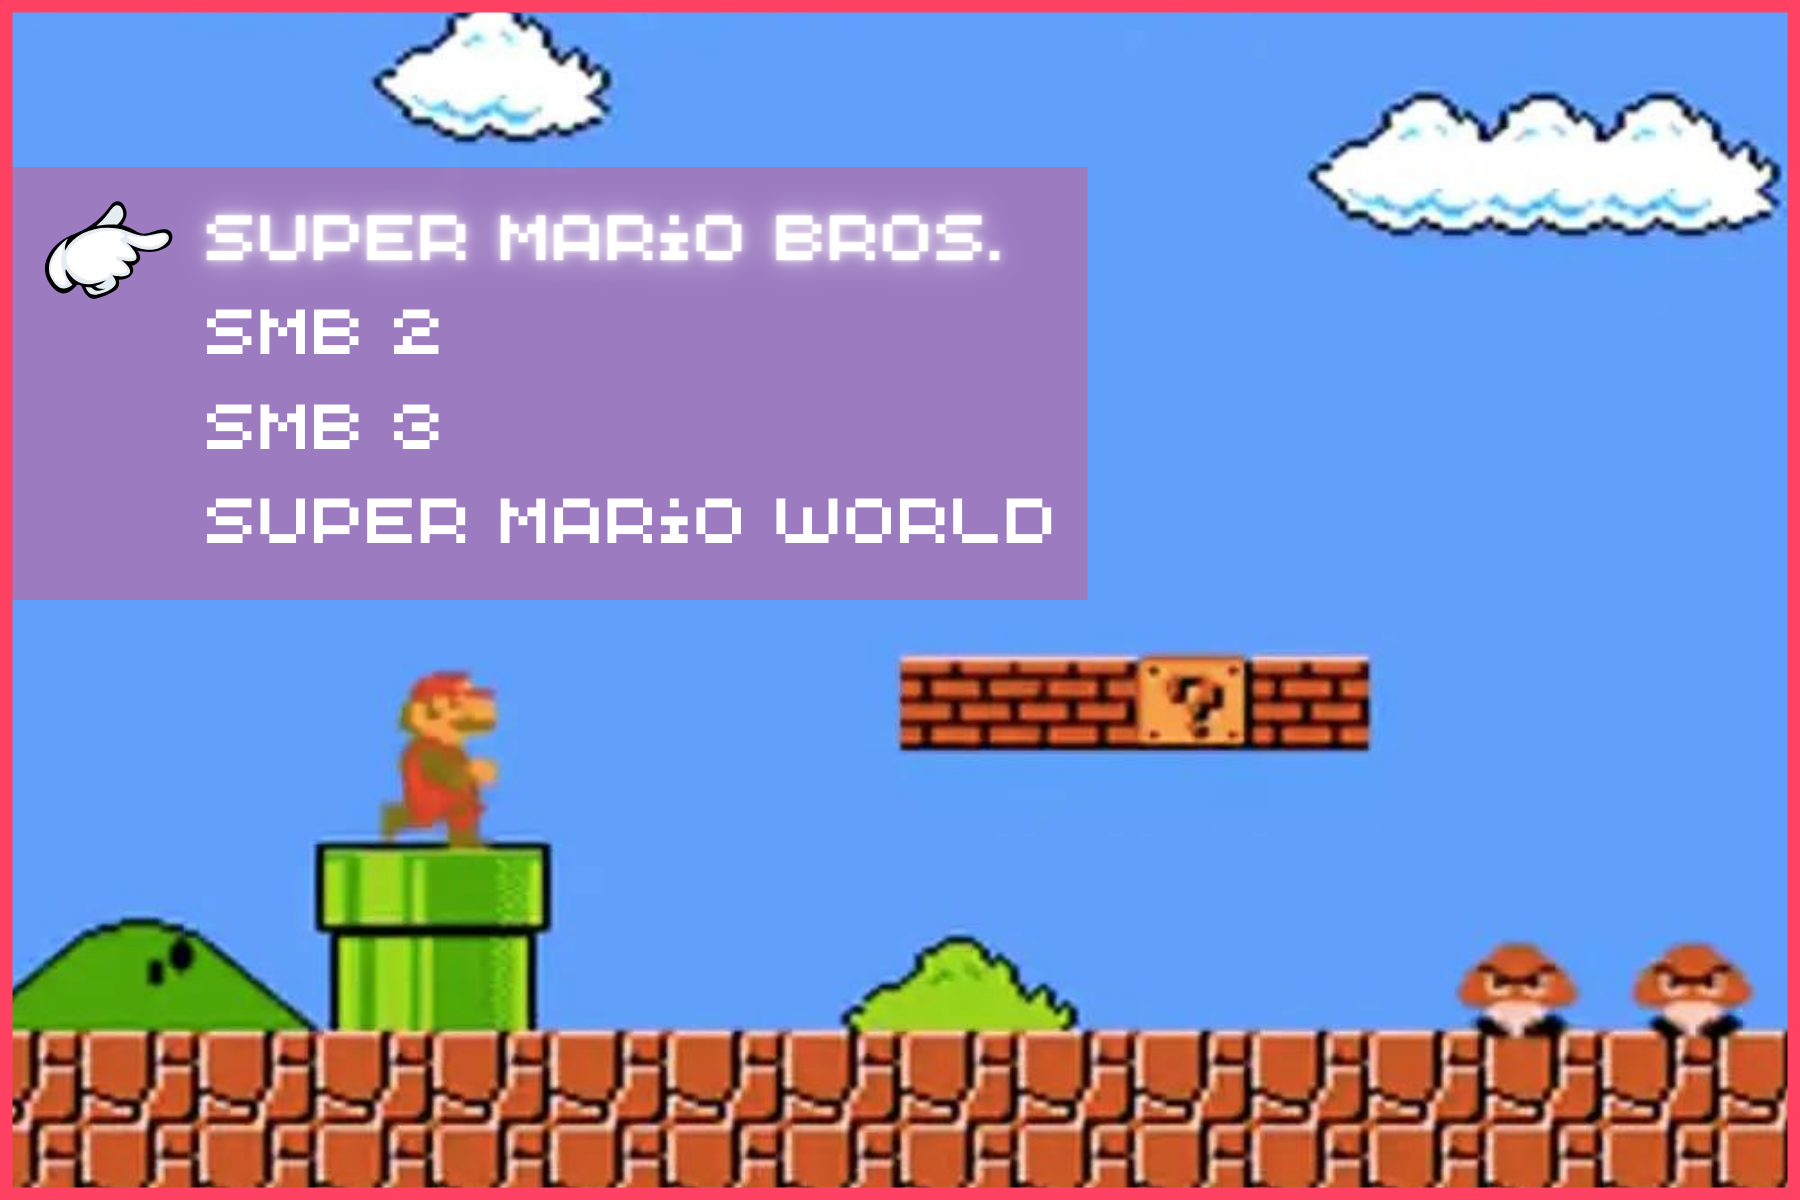 Video Game Quiz: Which Retro Super Mario Game Does This Scene Come From?